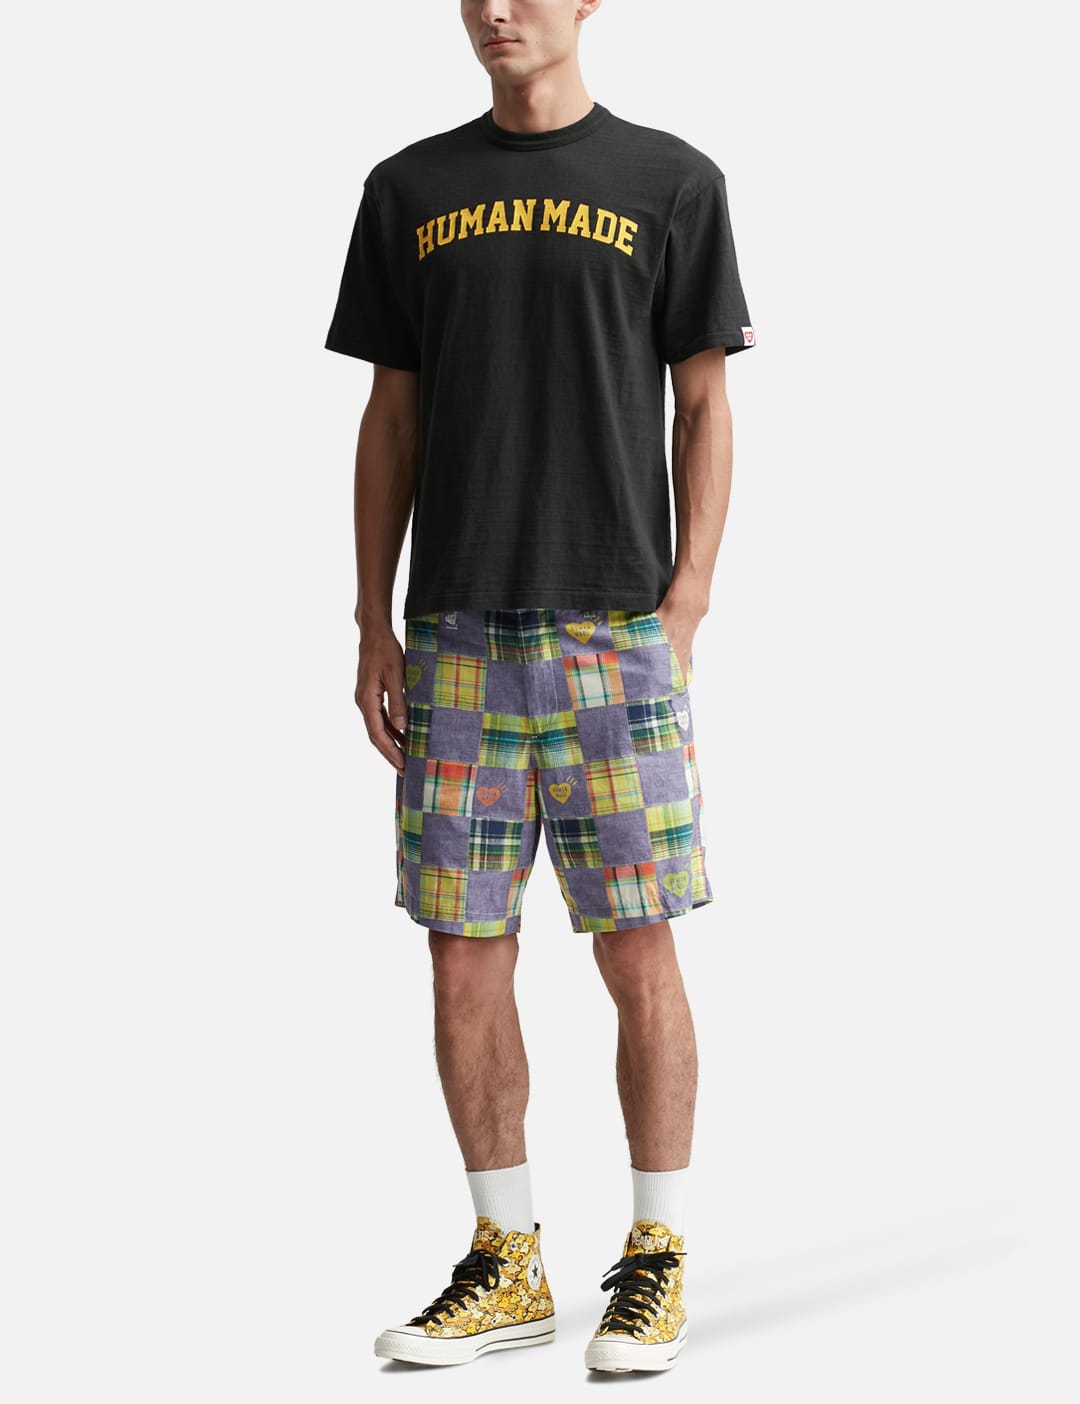 Human Made - GRAPHIC T-SHIRT #06 | HBX - Globally Curated Fashion